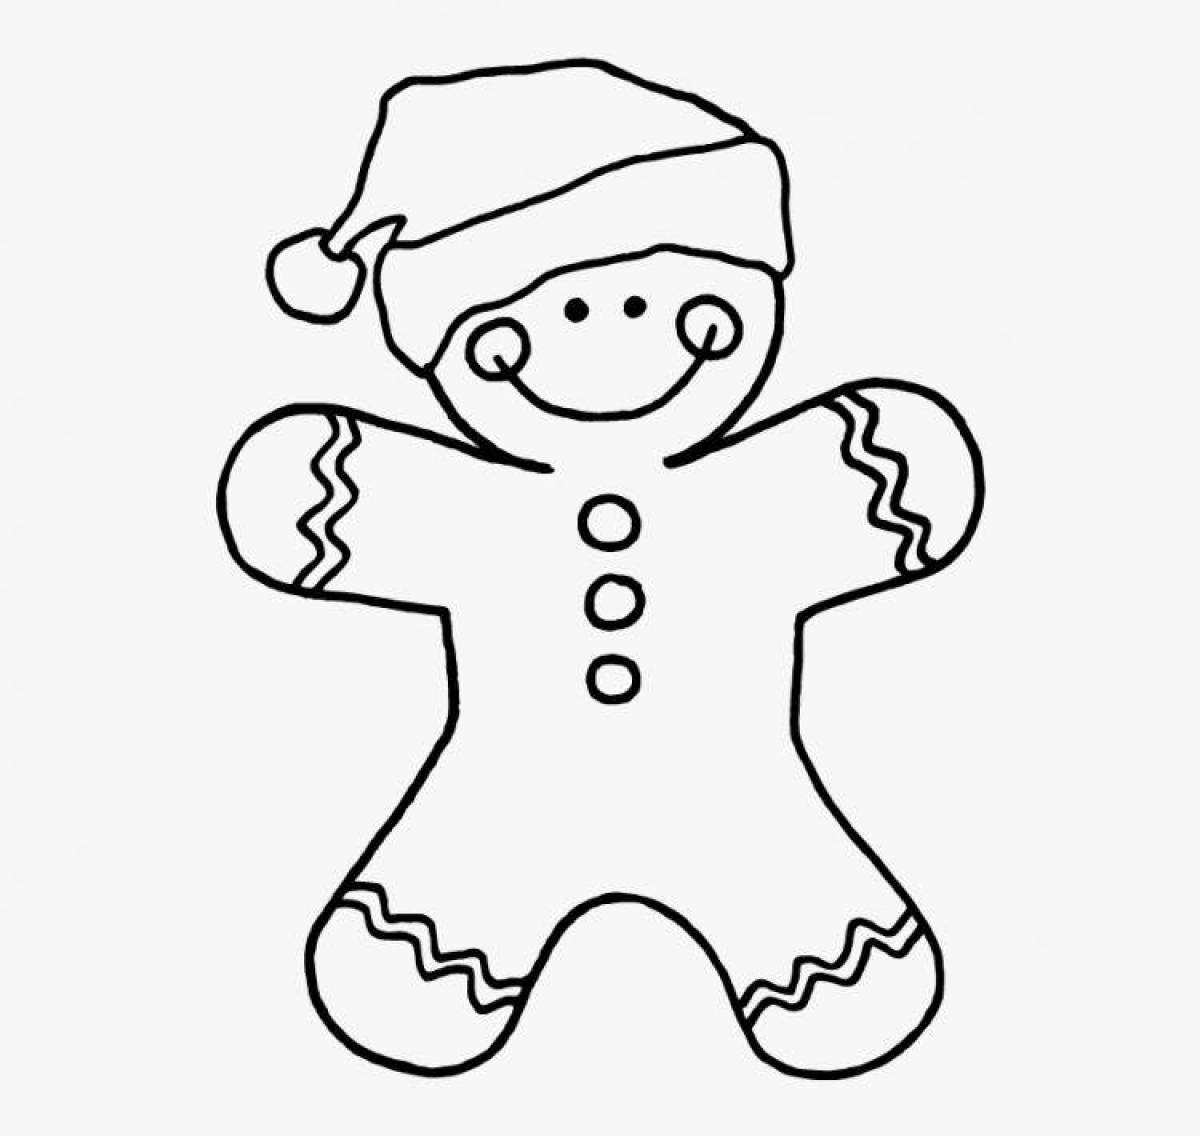 Exciting gingerbread man coloring book